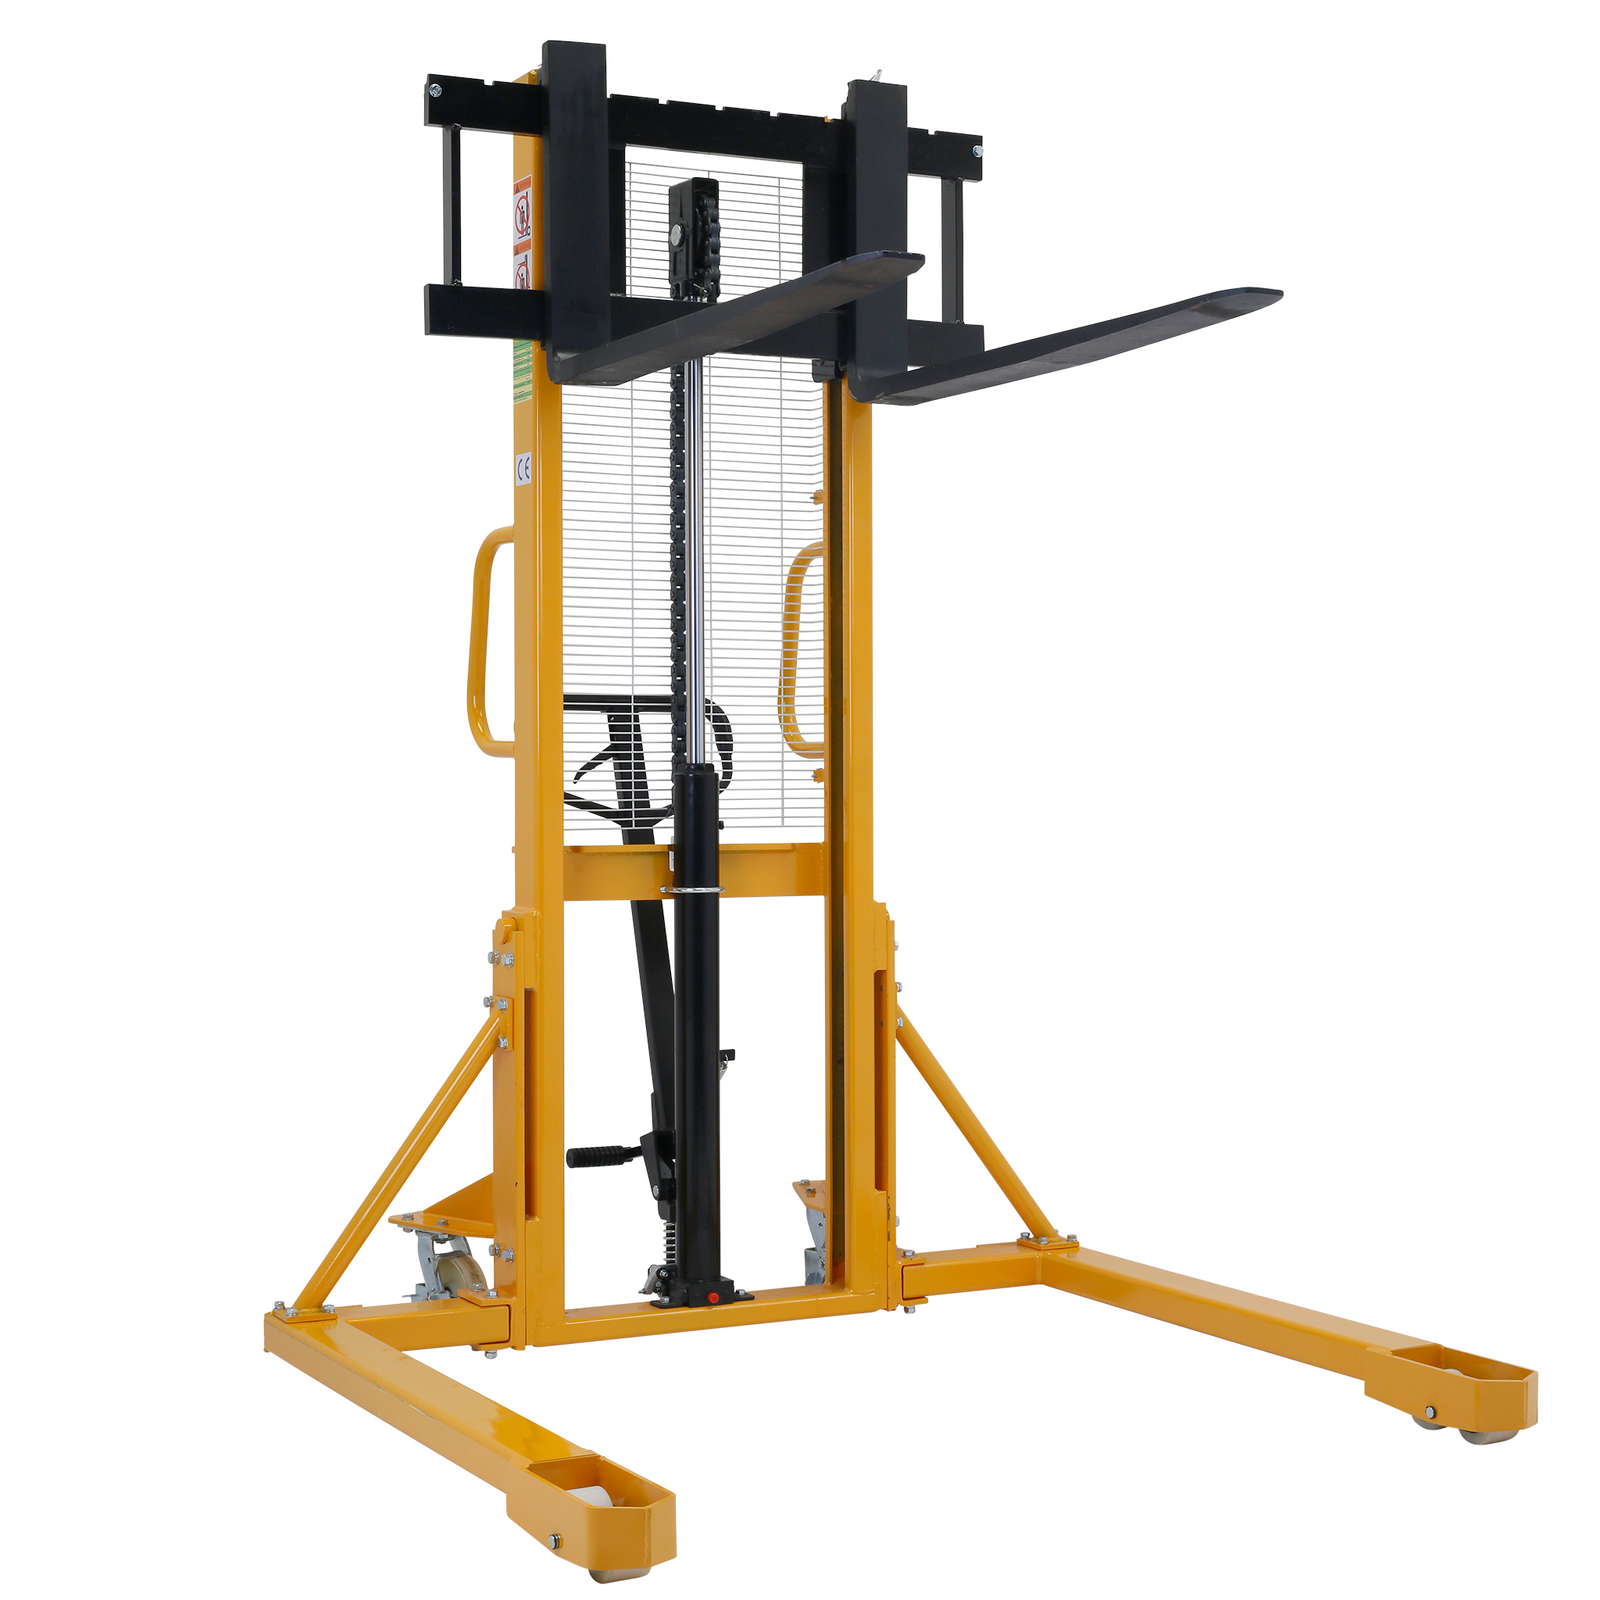 Diagonal view of a yellow and black JORESTECH pallet stacker with the nails elevated